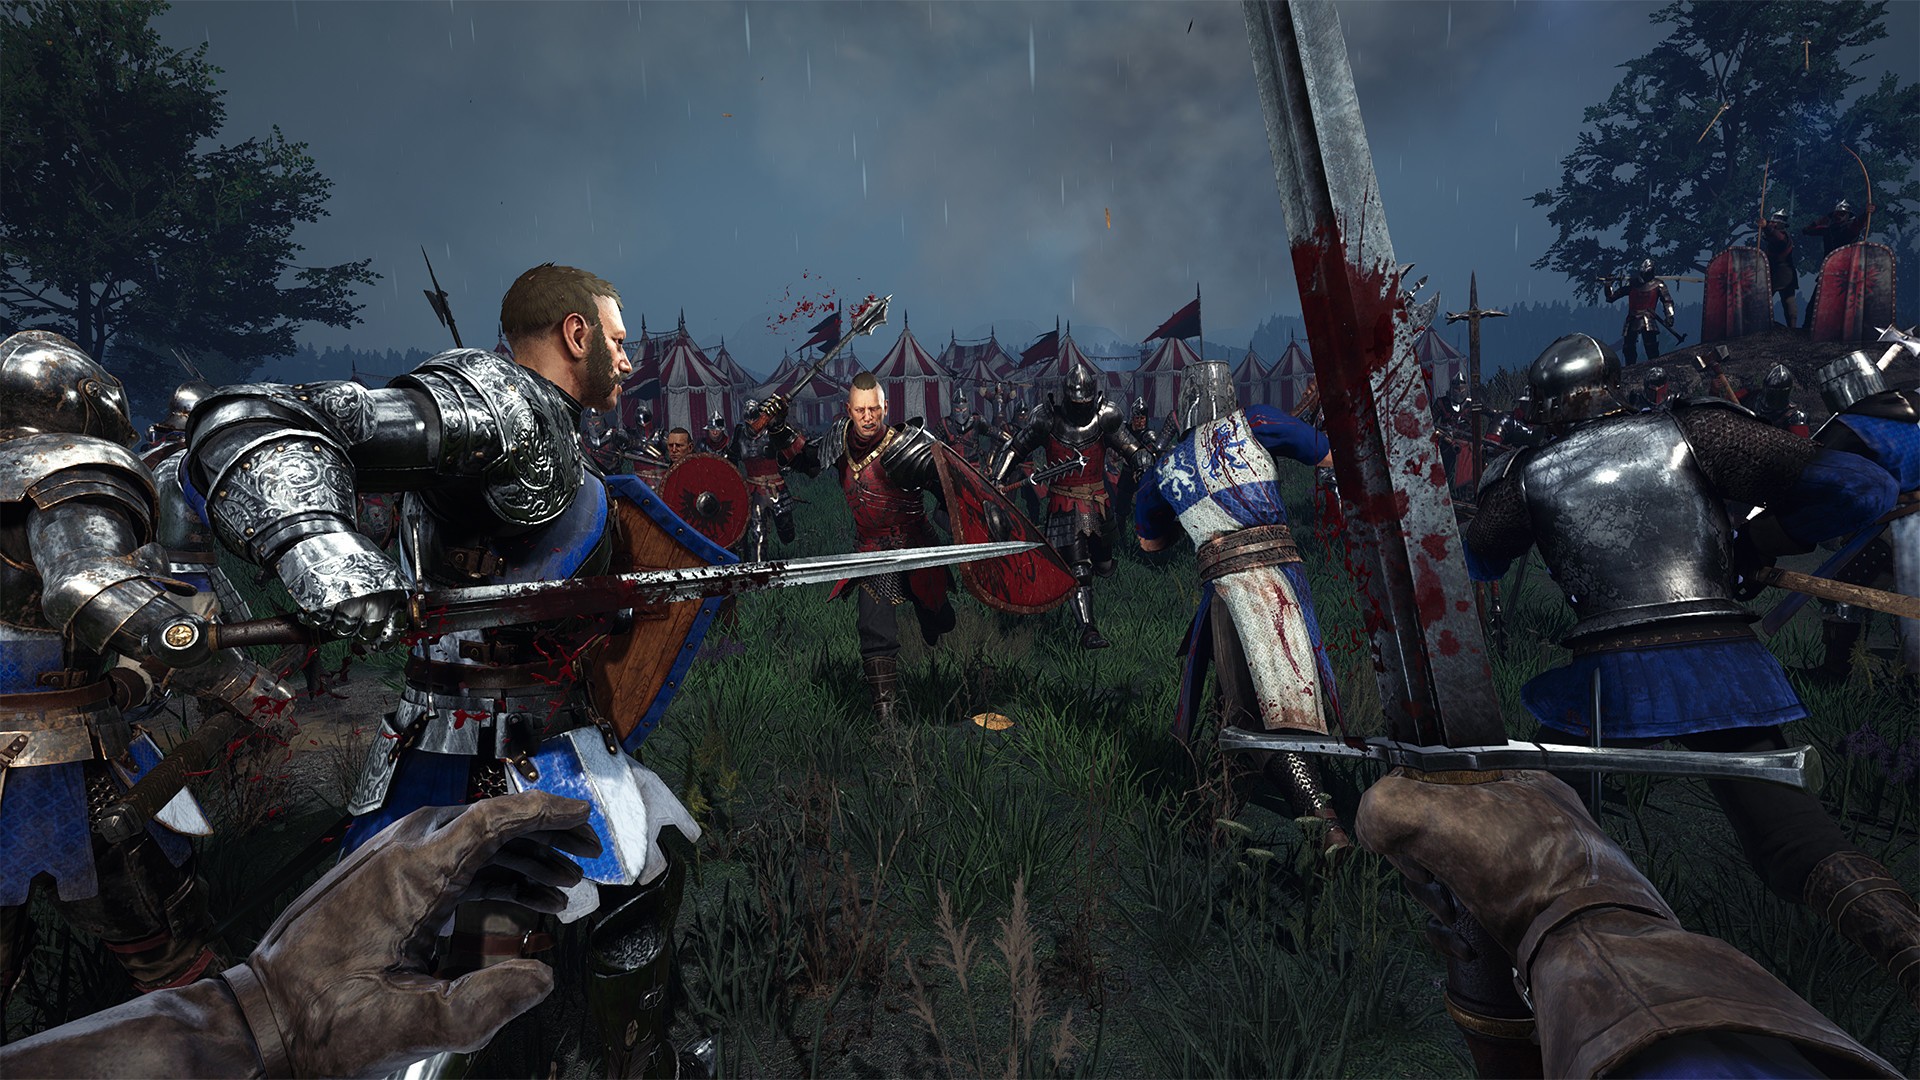 download free chivalry 2 price